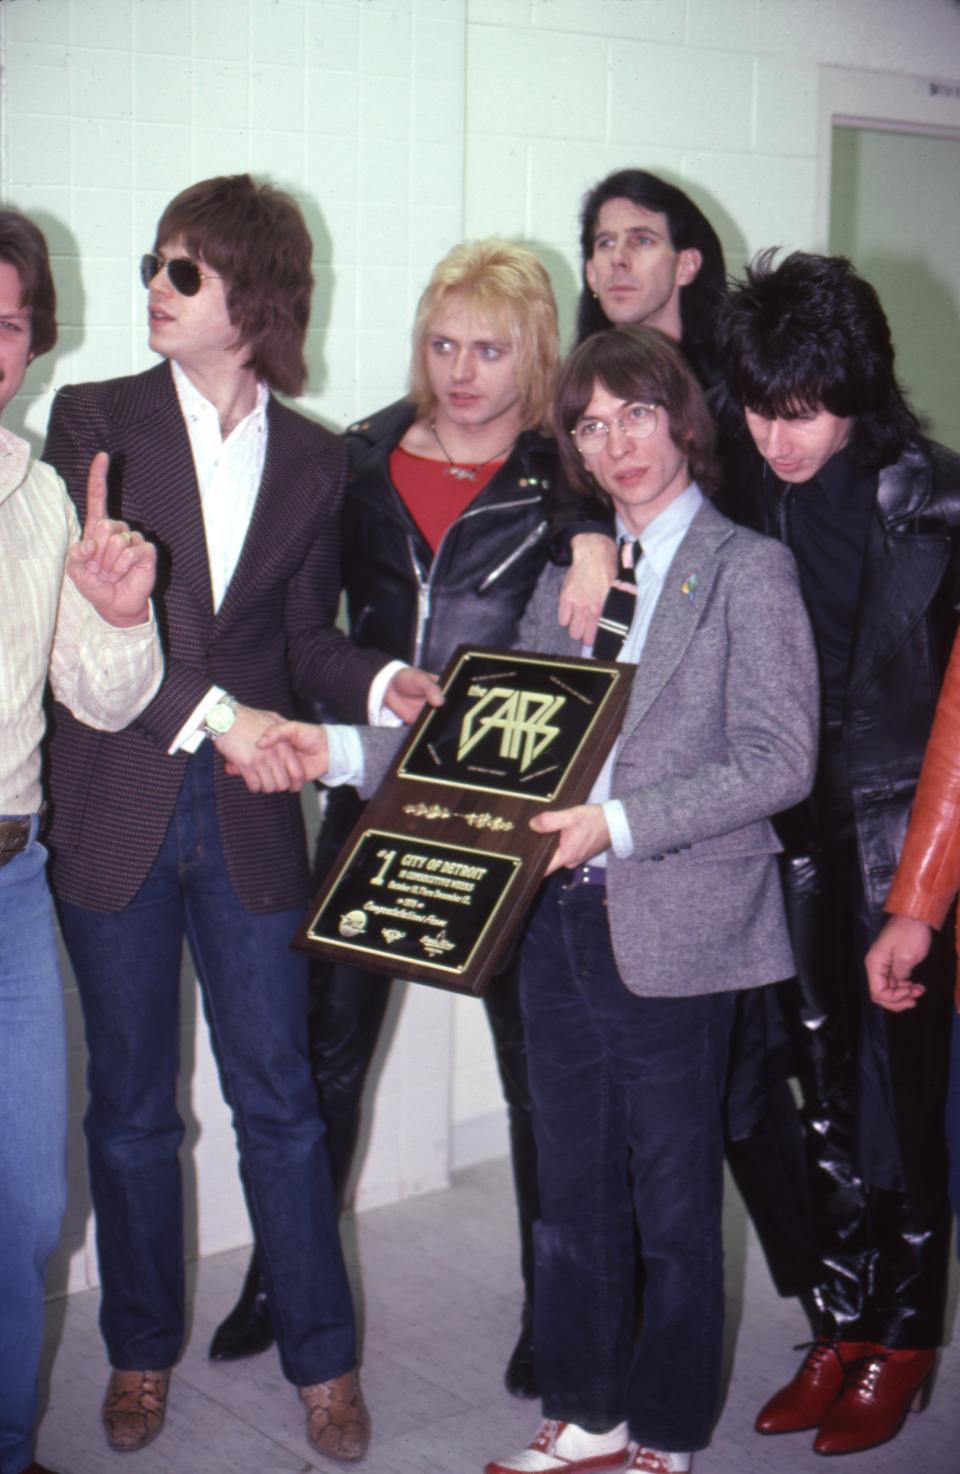 The Cars celebrate a No. 1 hit in 1979. (Photo: Donaldson Collection via Getty Images)